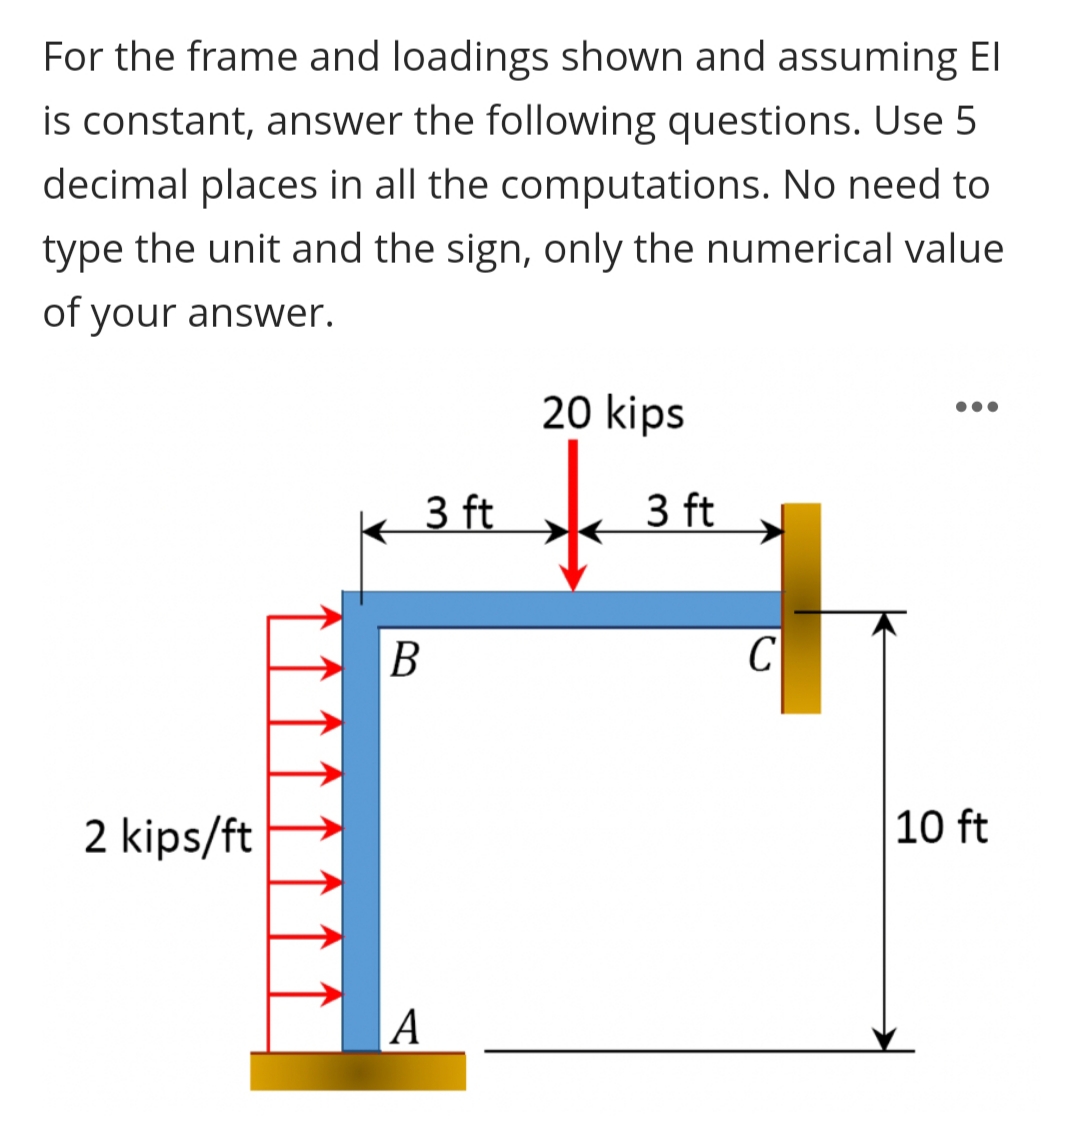 For the frame and loadings shown and assuming El
is constant, answer the following questions. Use 5
decimal places in all the computations. No need to
type the unit and the sign, only the numerical value
of your answer.
20 kips
•..
3 ft
3 ft
B
C
2 kips/ft
10 ft
A
